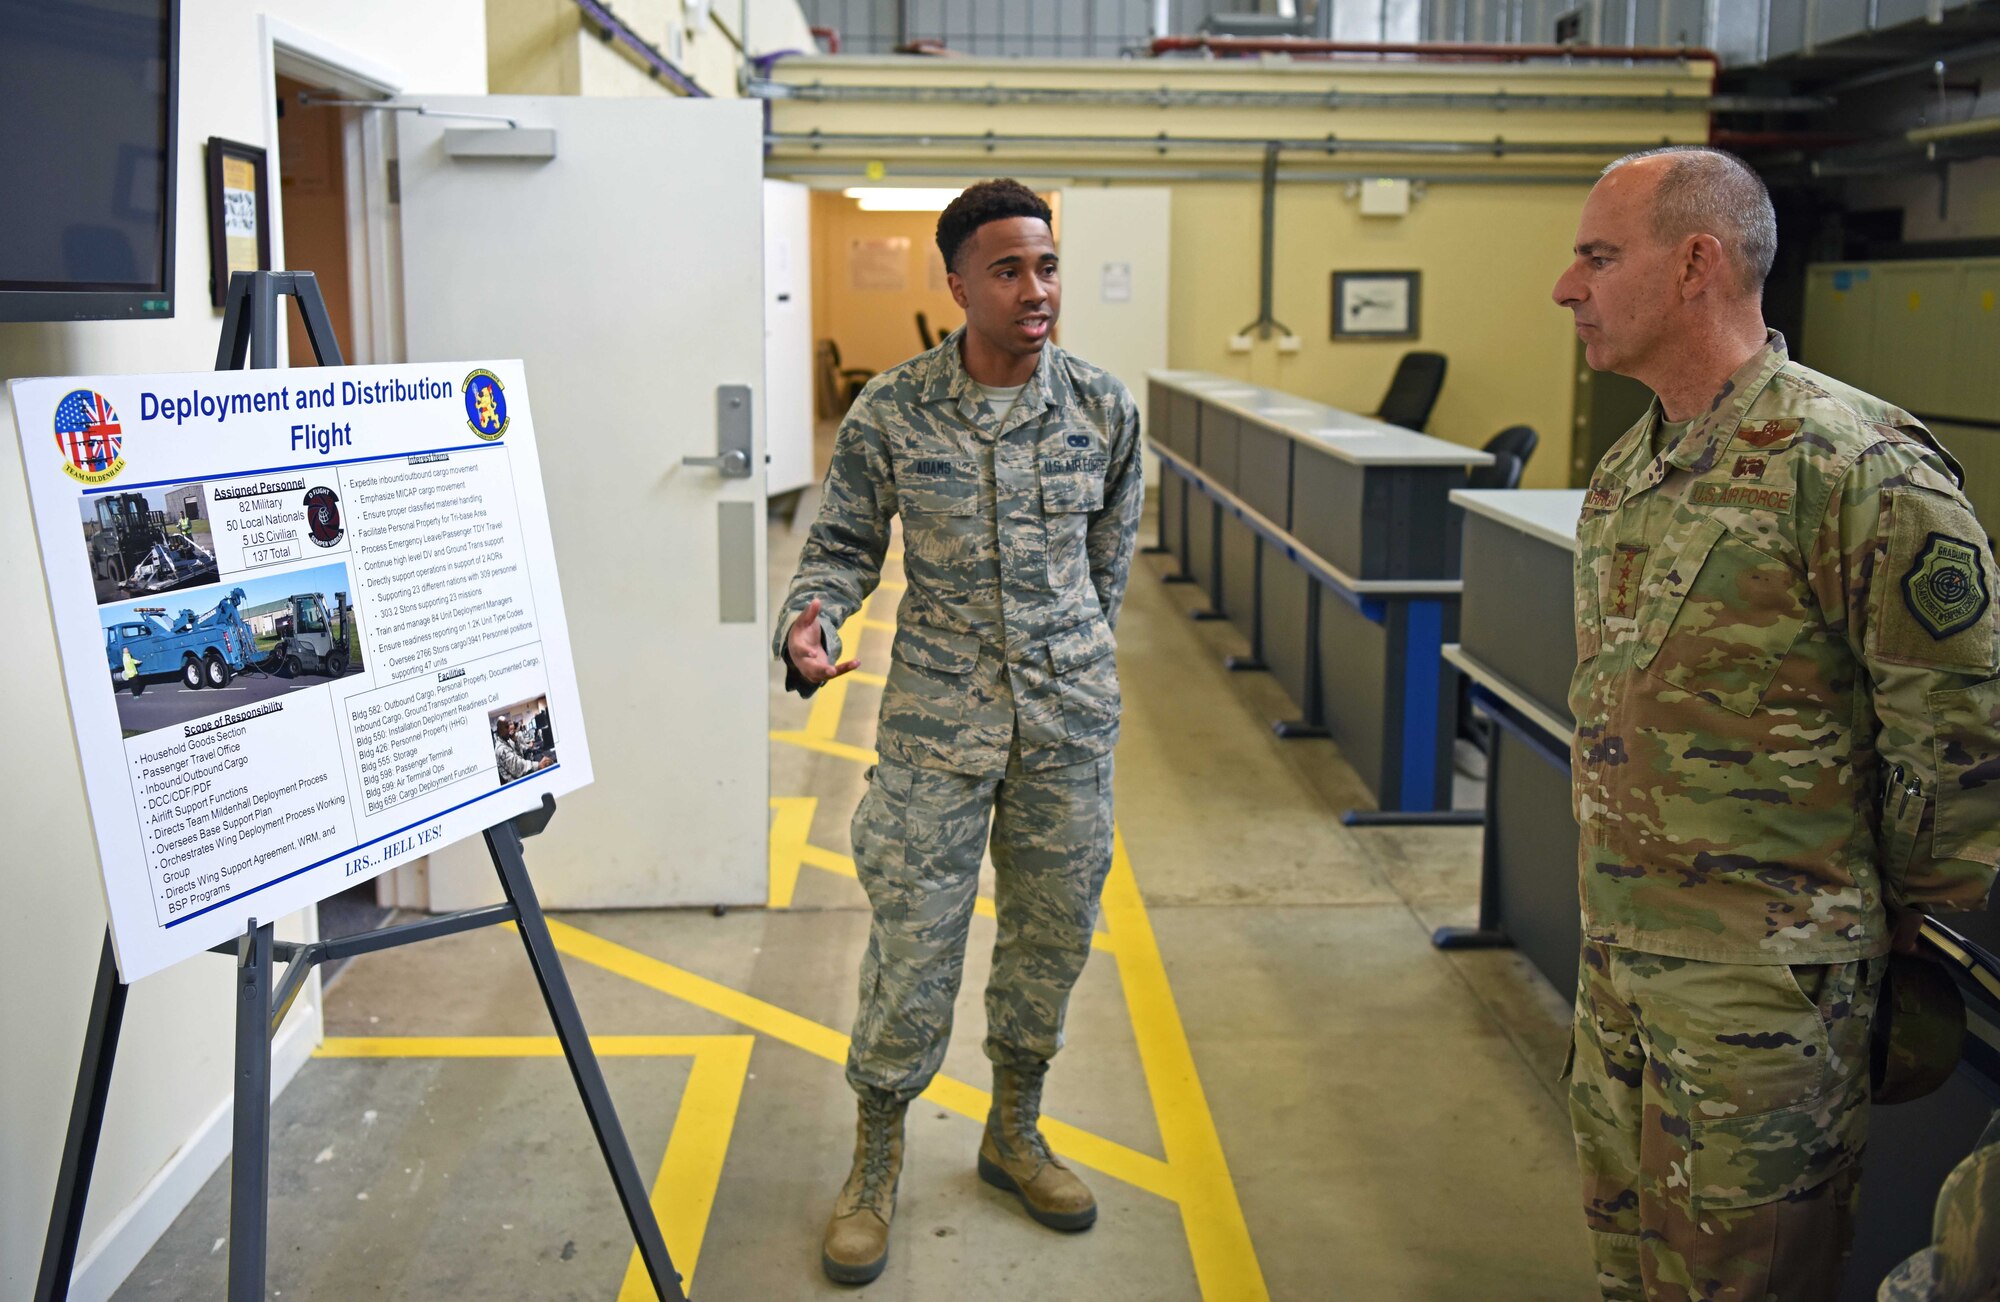 U.S. Air Force Gen. Jeff Harrigian, U.S. Air Forces in Europe – Air Forces Africa commander, receives a logistics briefing from Staff Sgt. Amir Adams, 100th Logistics Readiness Squadron member, at RAF Mildenhall, England, July 15, 2019. During the visit, Harrigian discussed how crucial RAF Mildenhall is to our allies all over the region. (U.S. Air Force photo by Airman 1st Class Brandon Esau)